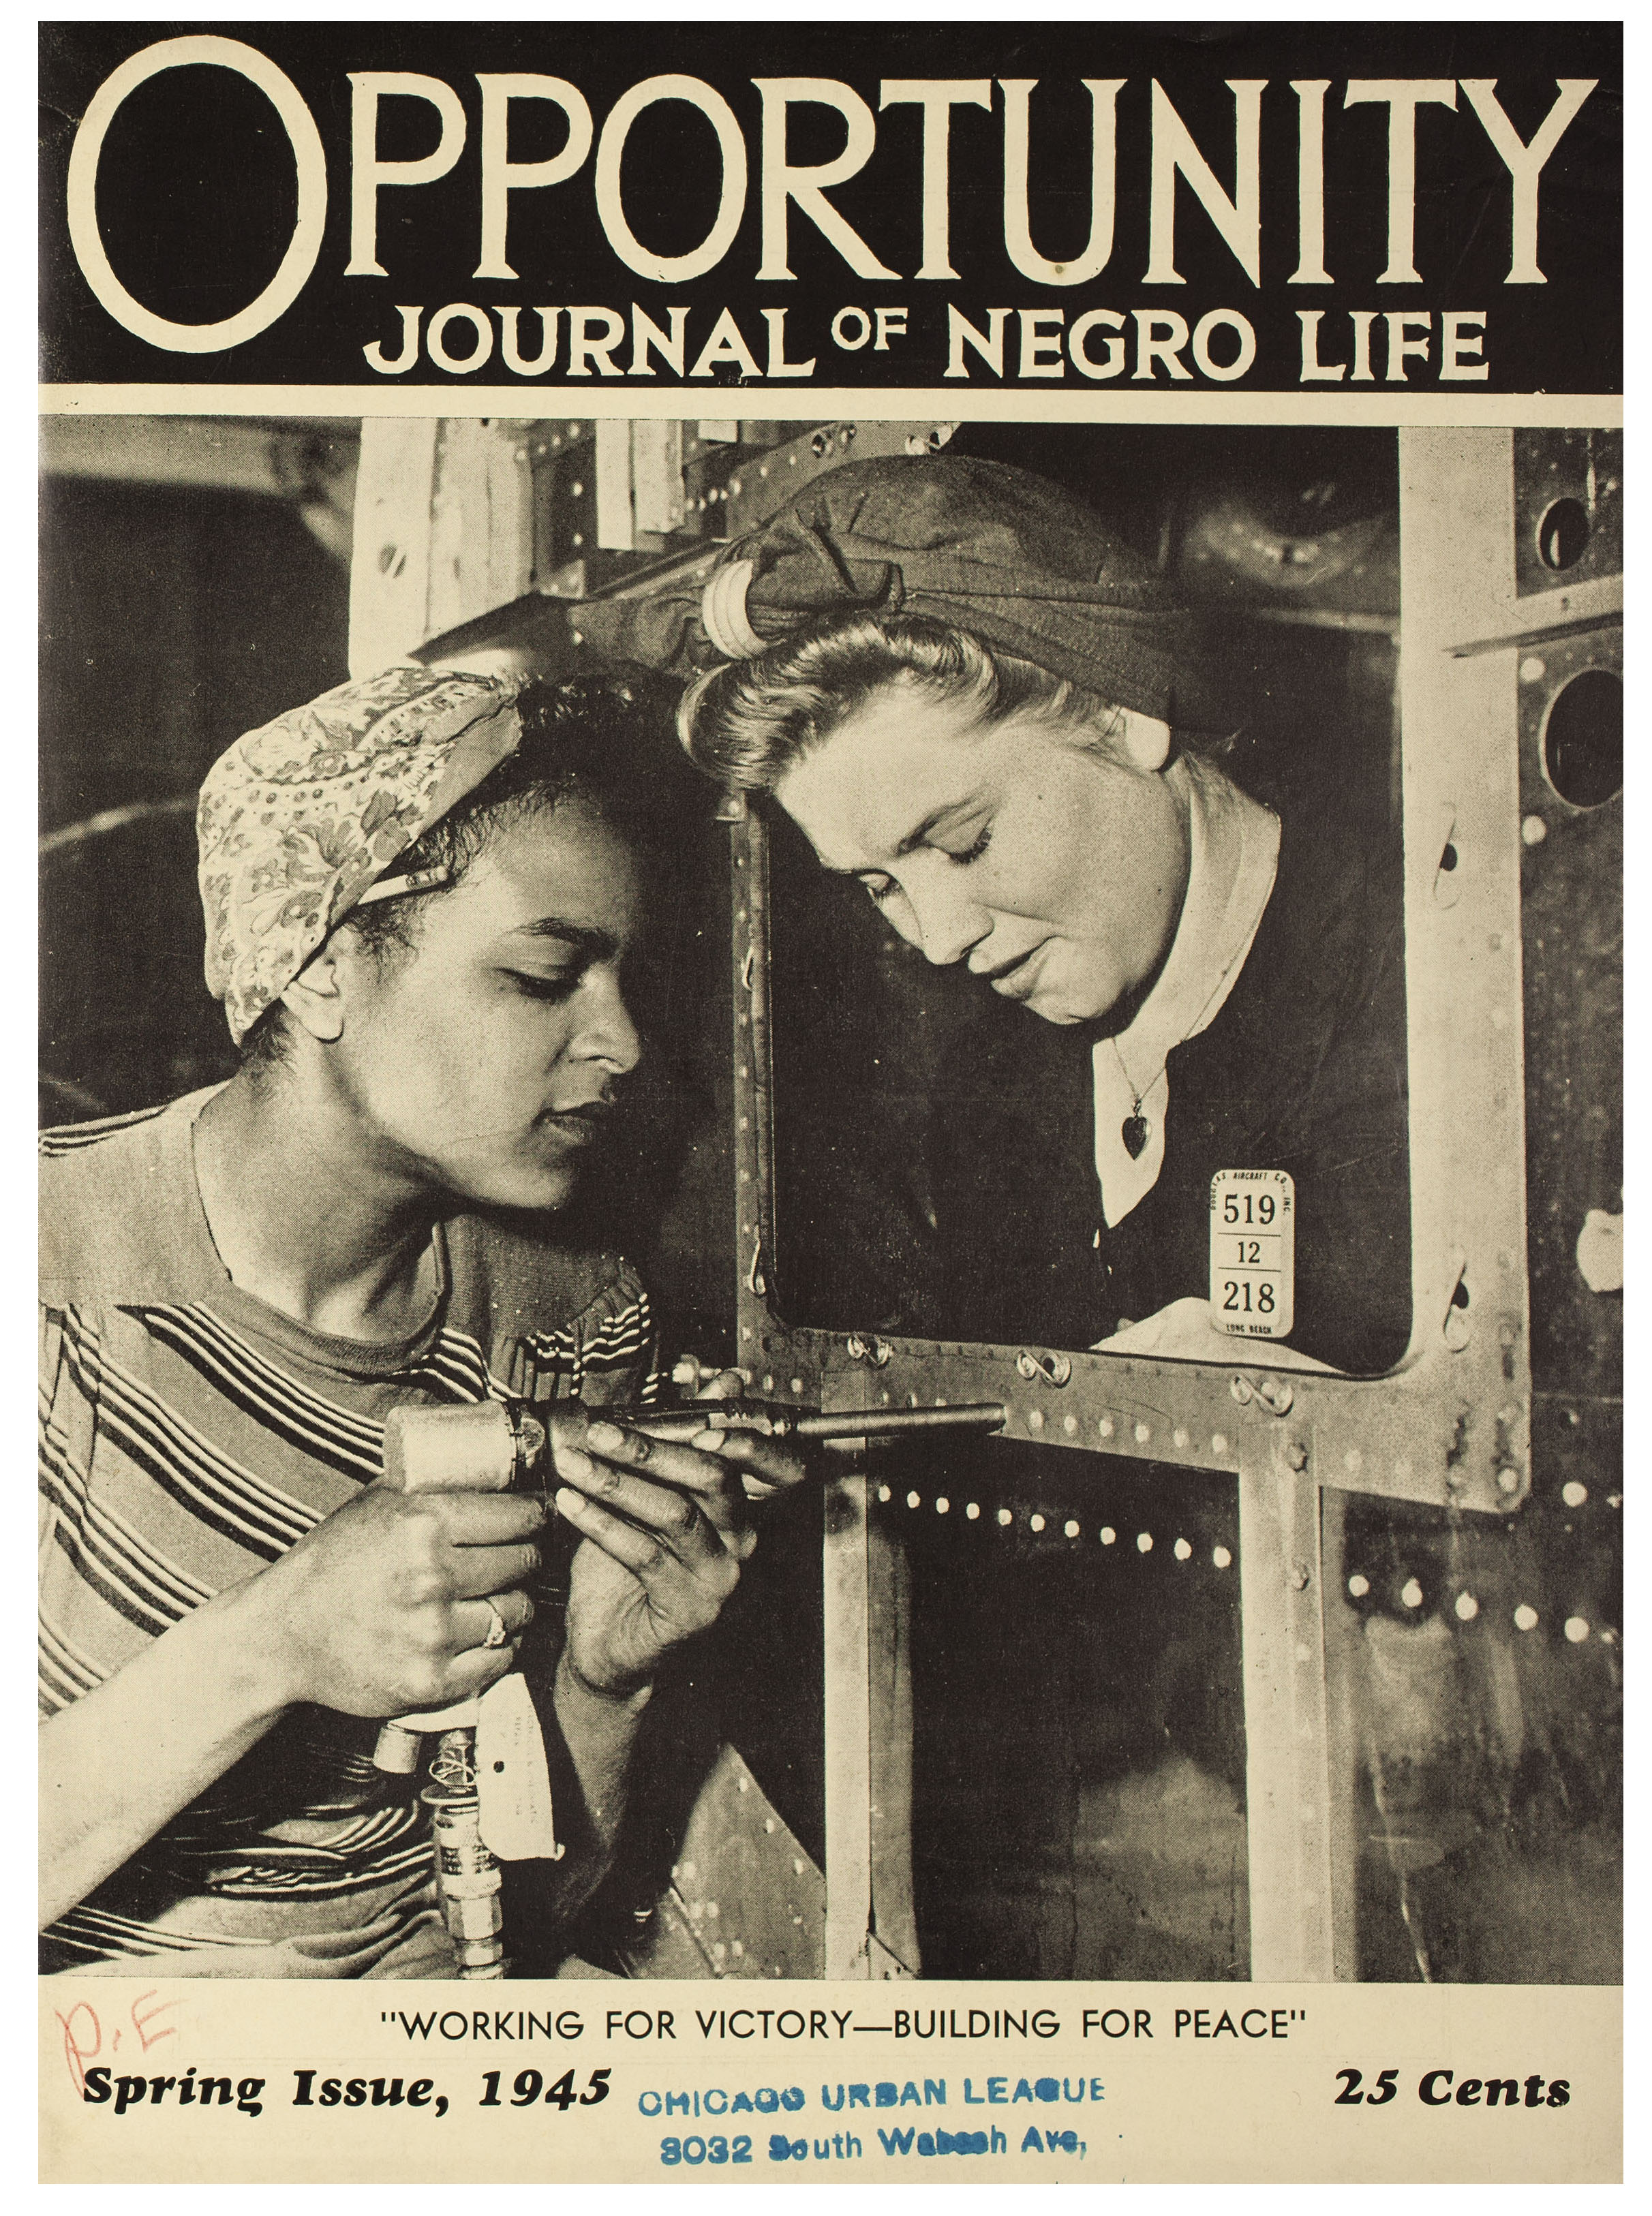 Cover of Opportunity Journal of Negro Life, showing a white and black woman working together.